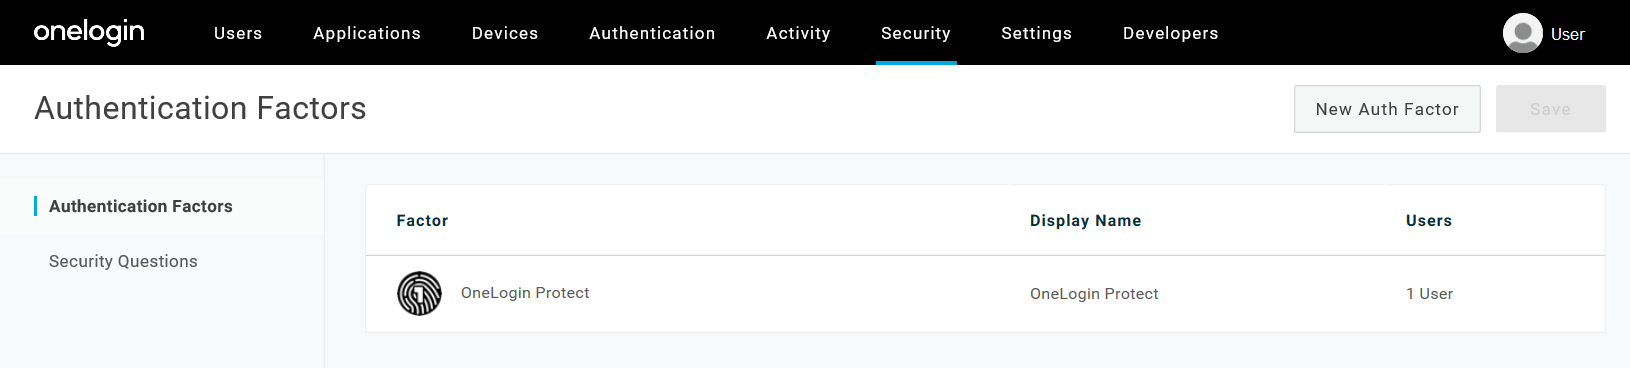 The authentication factor is listed on the Authentication Factors page